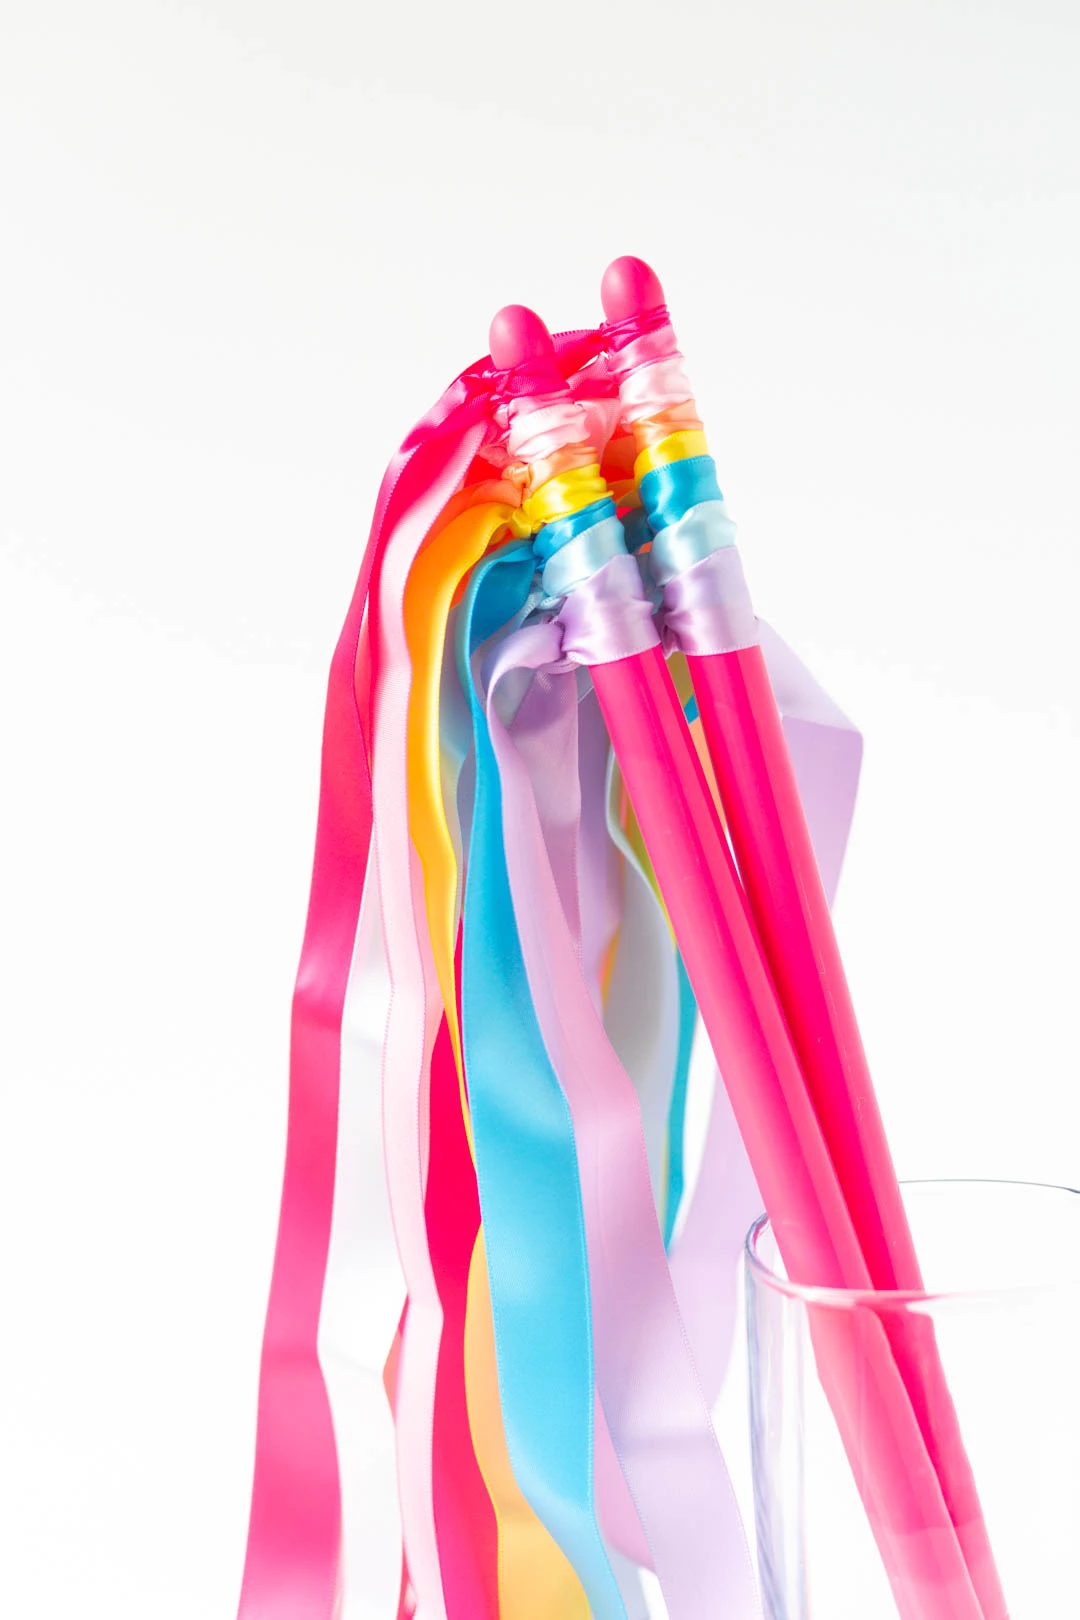 dancing wand ribbons standing upright to show ribbons hanging down